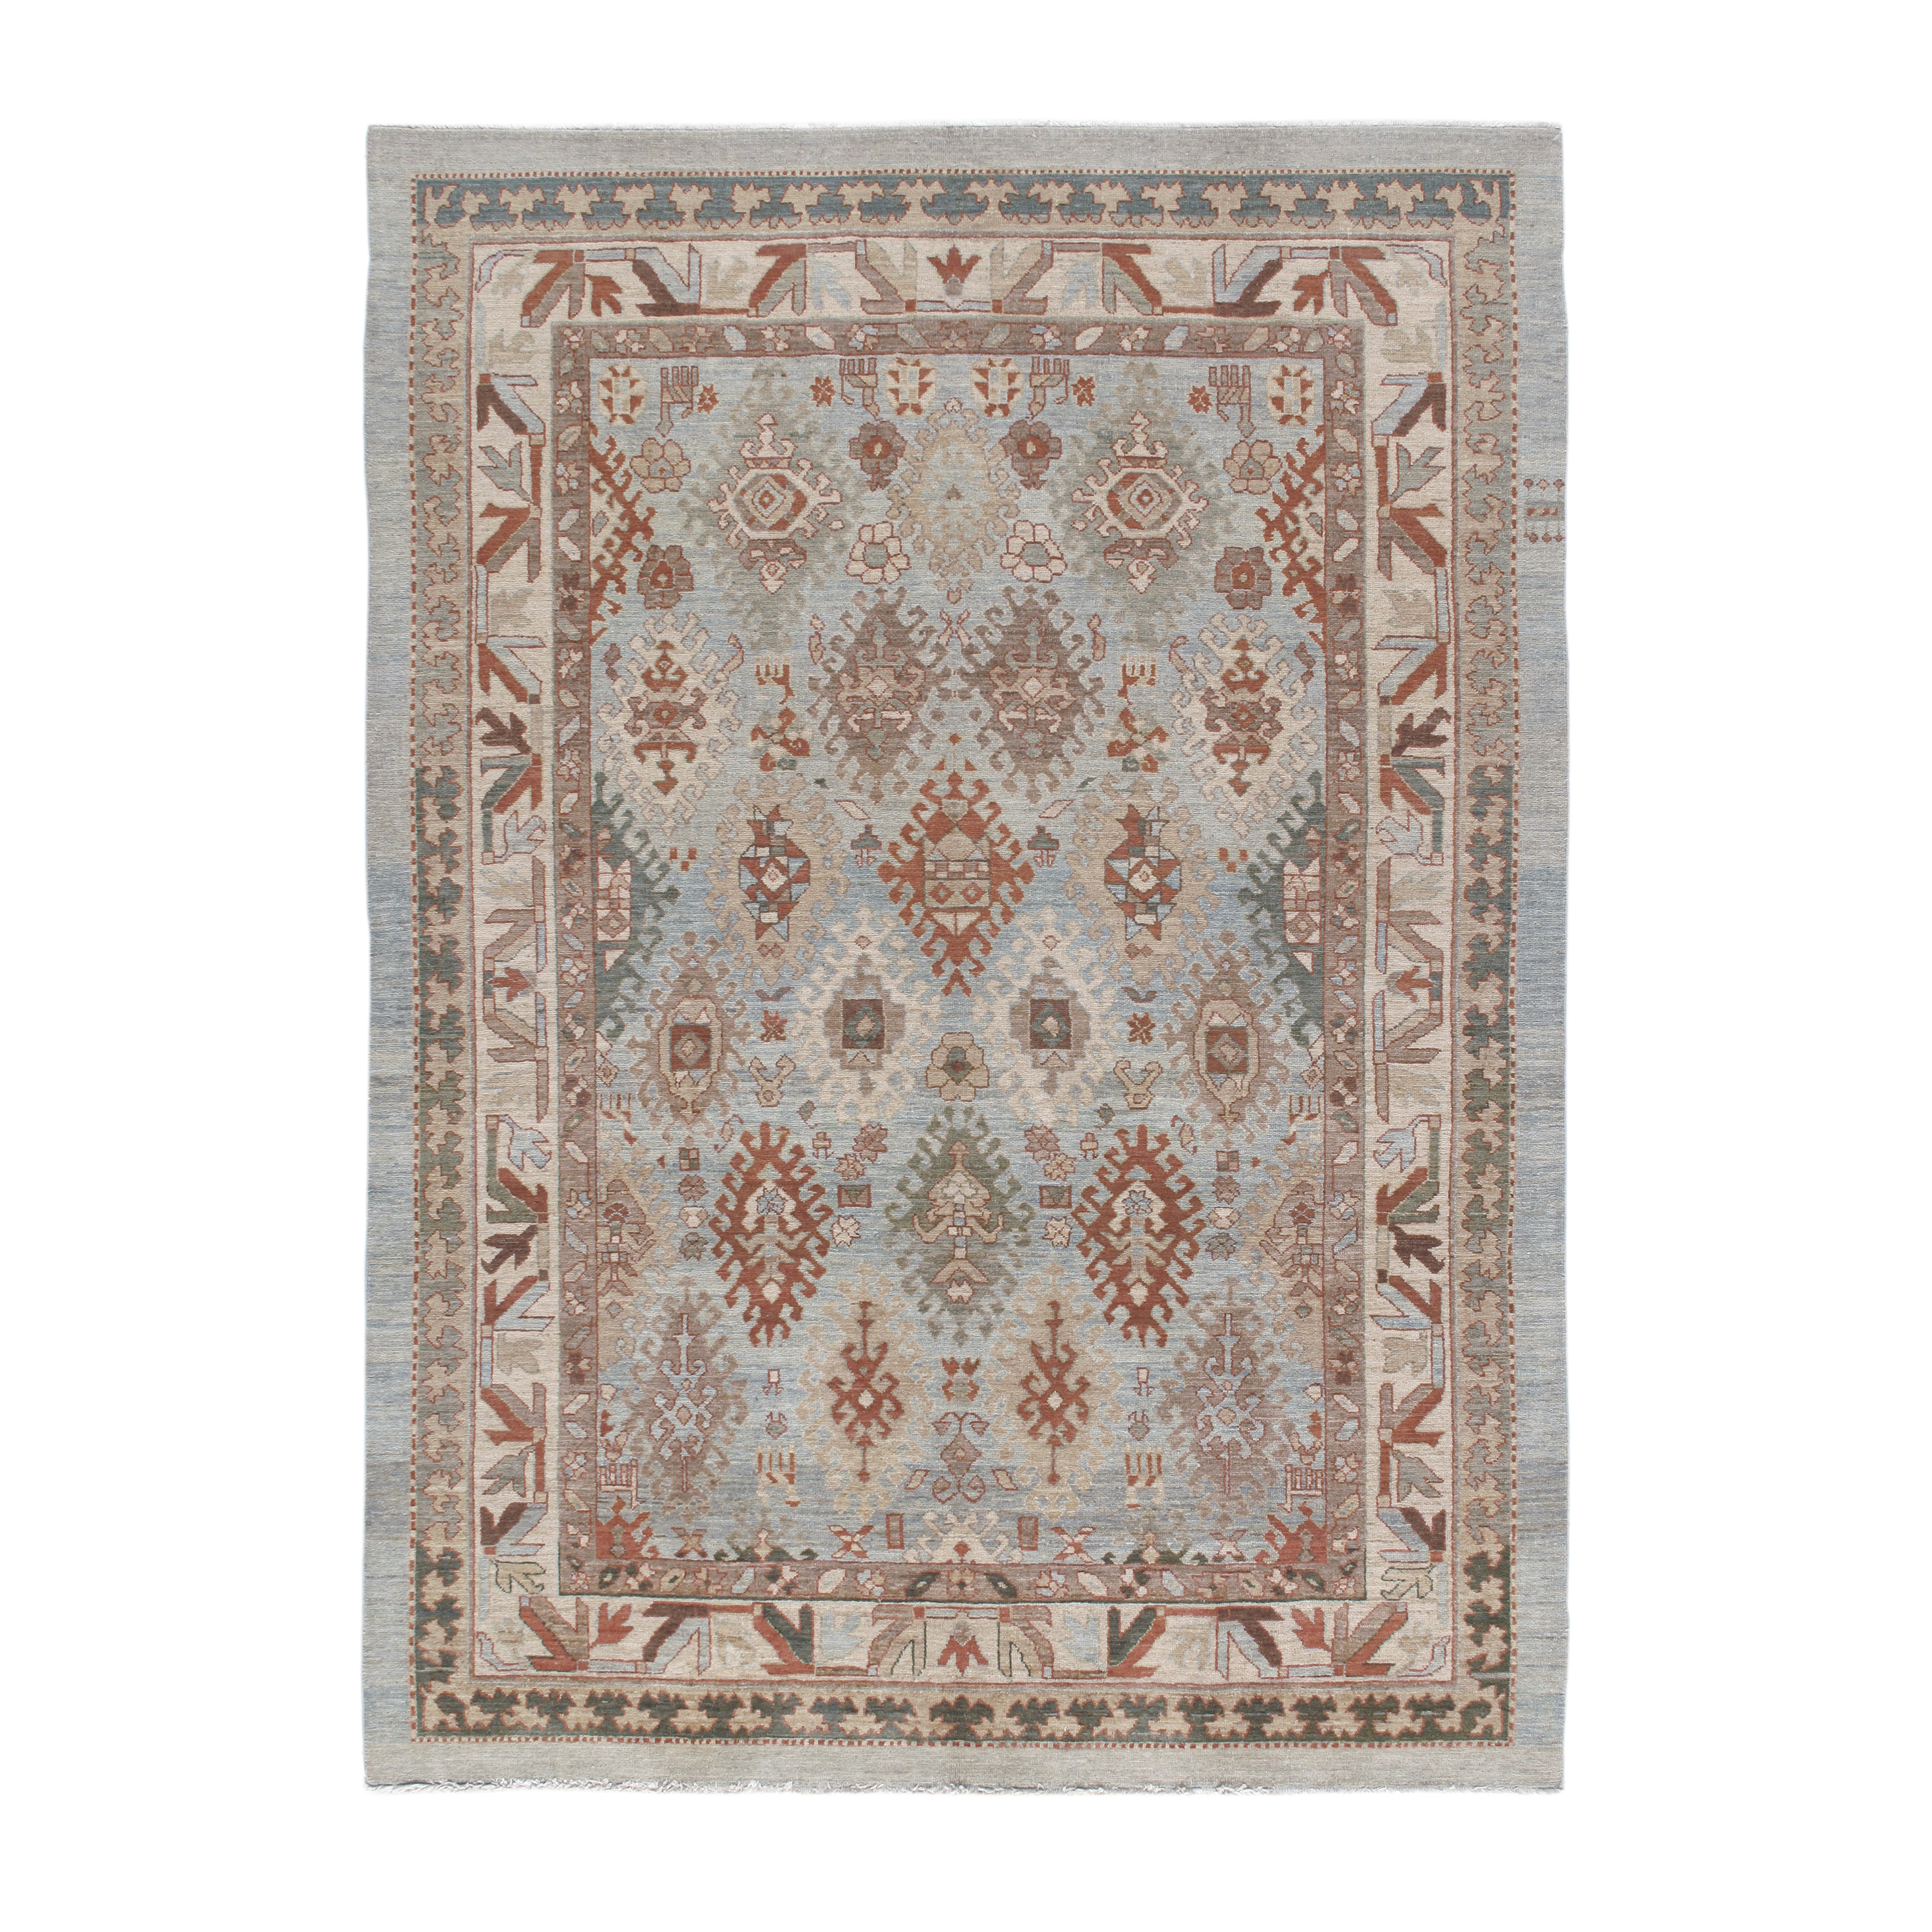 This Persian Kurdish Rug is hand-knotted and made of 100% wool.